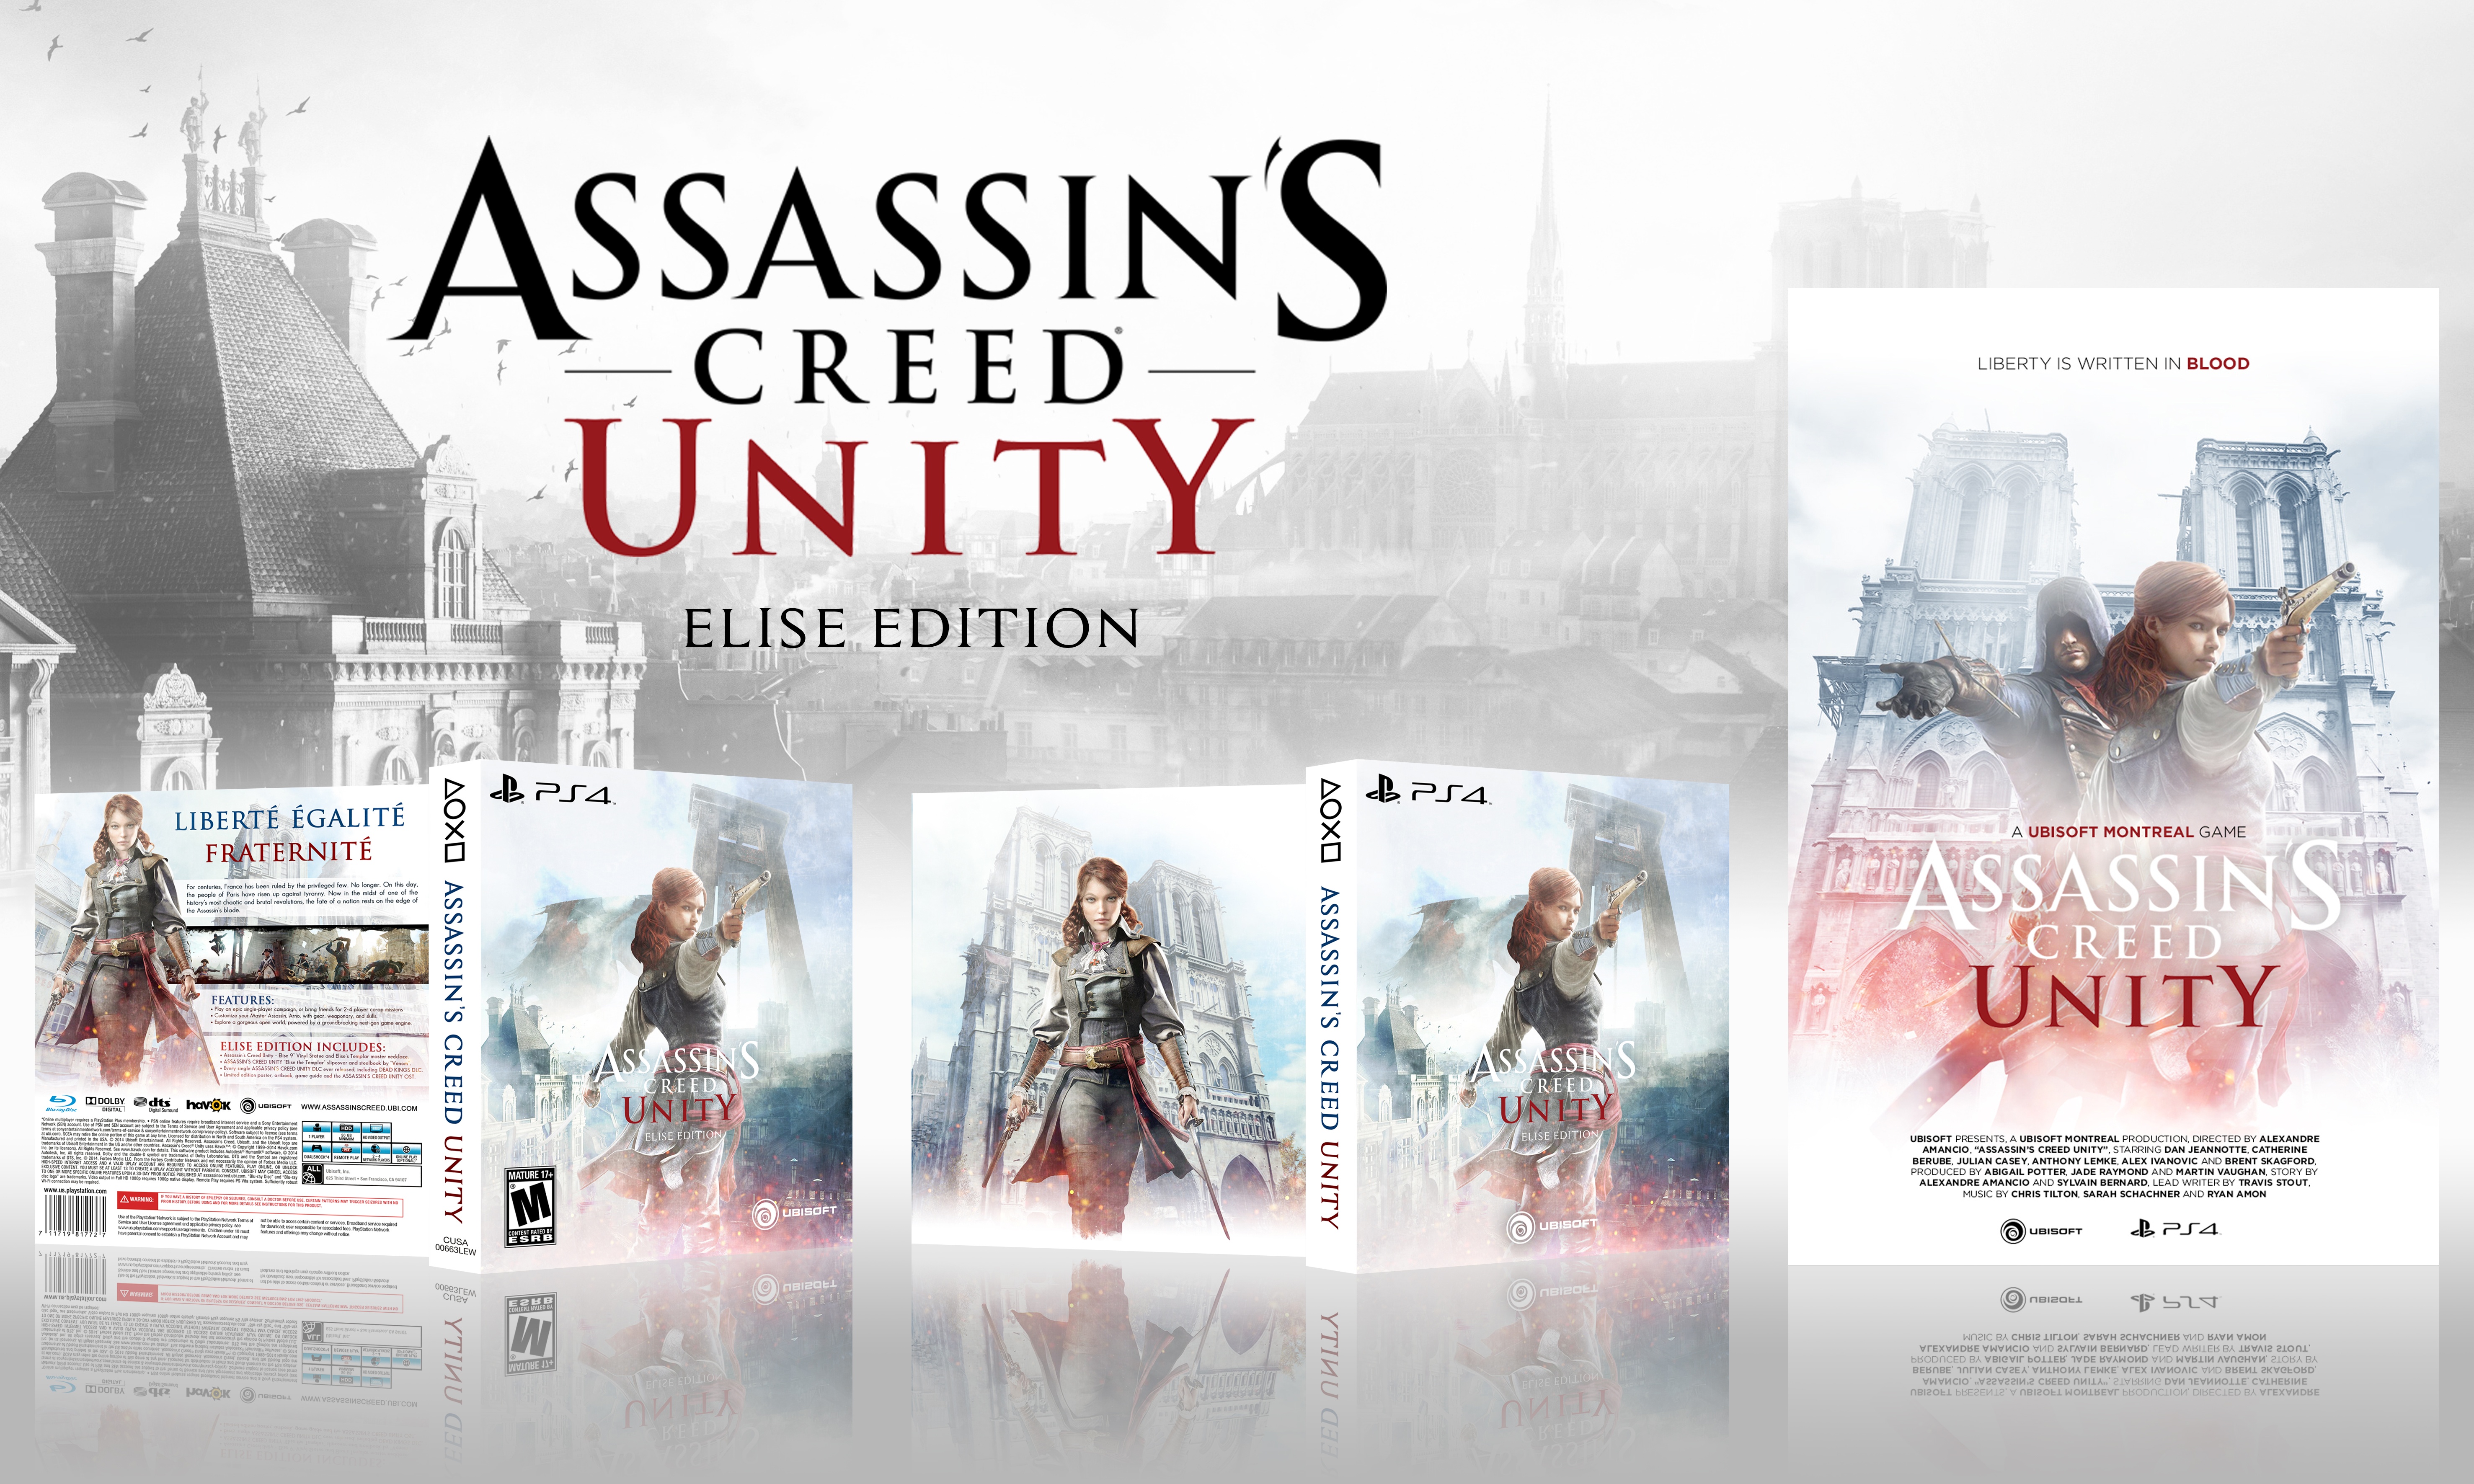 Assassin's Creed Unity: Elise Edition box cover